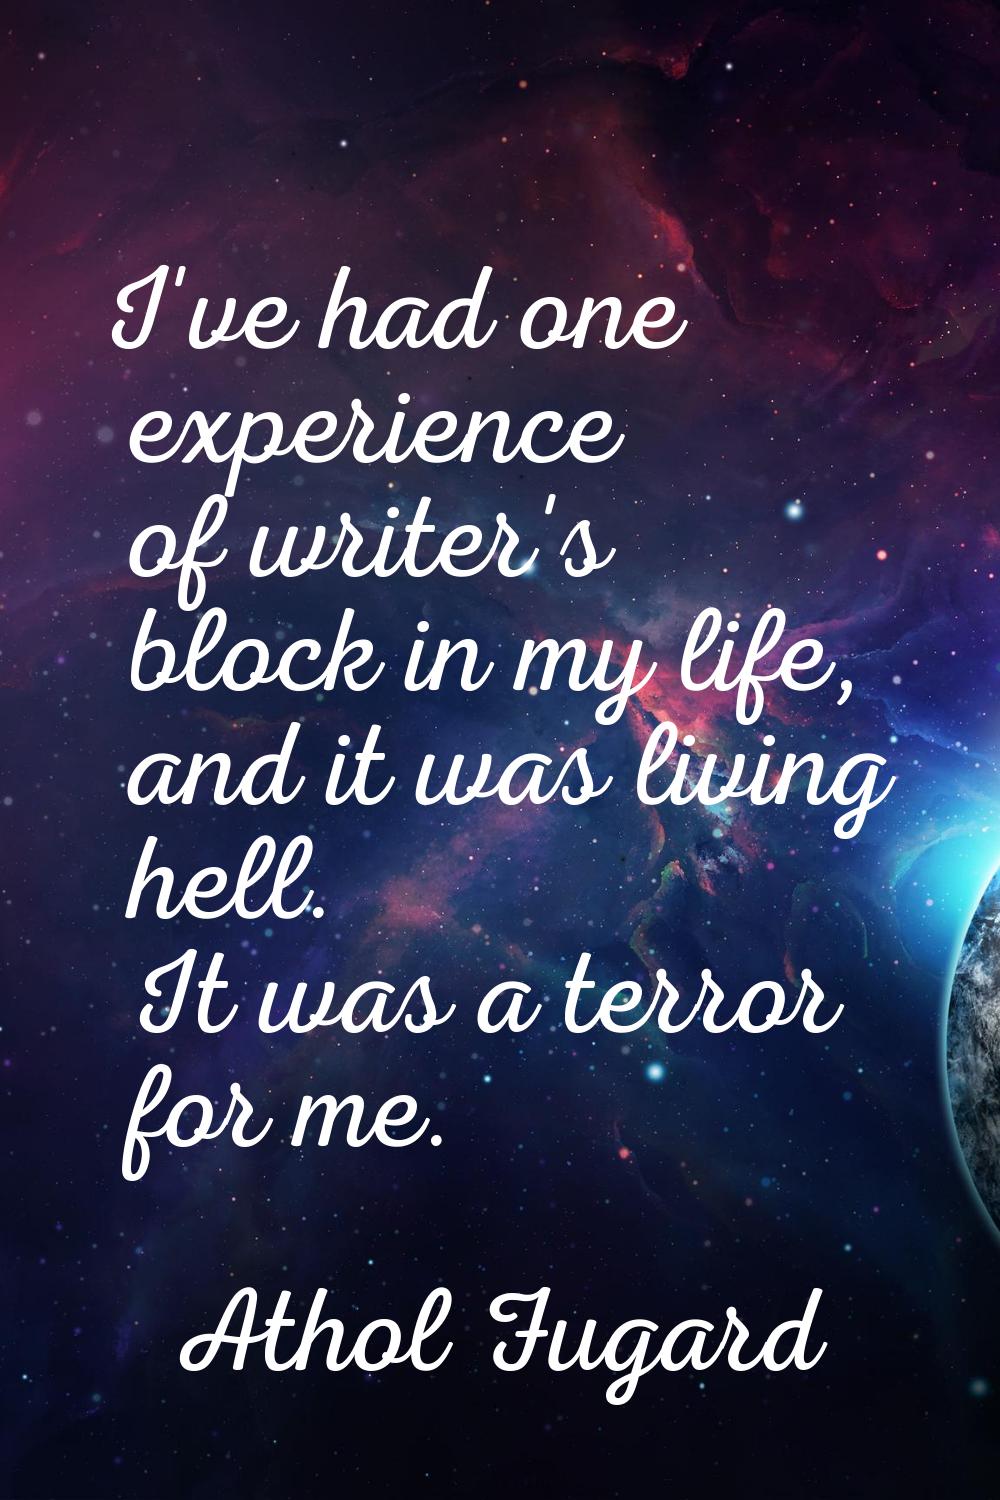 I've had one experience of writer's block in my life, and it was living hell. It was a terror for m